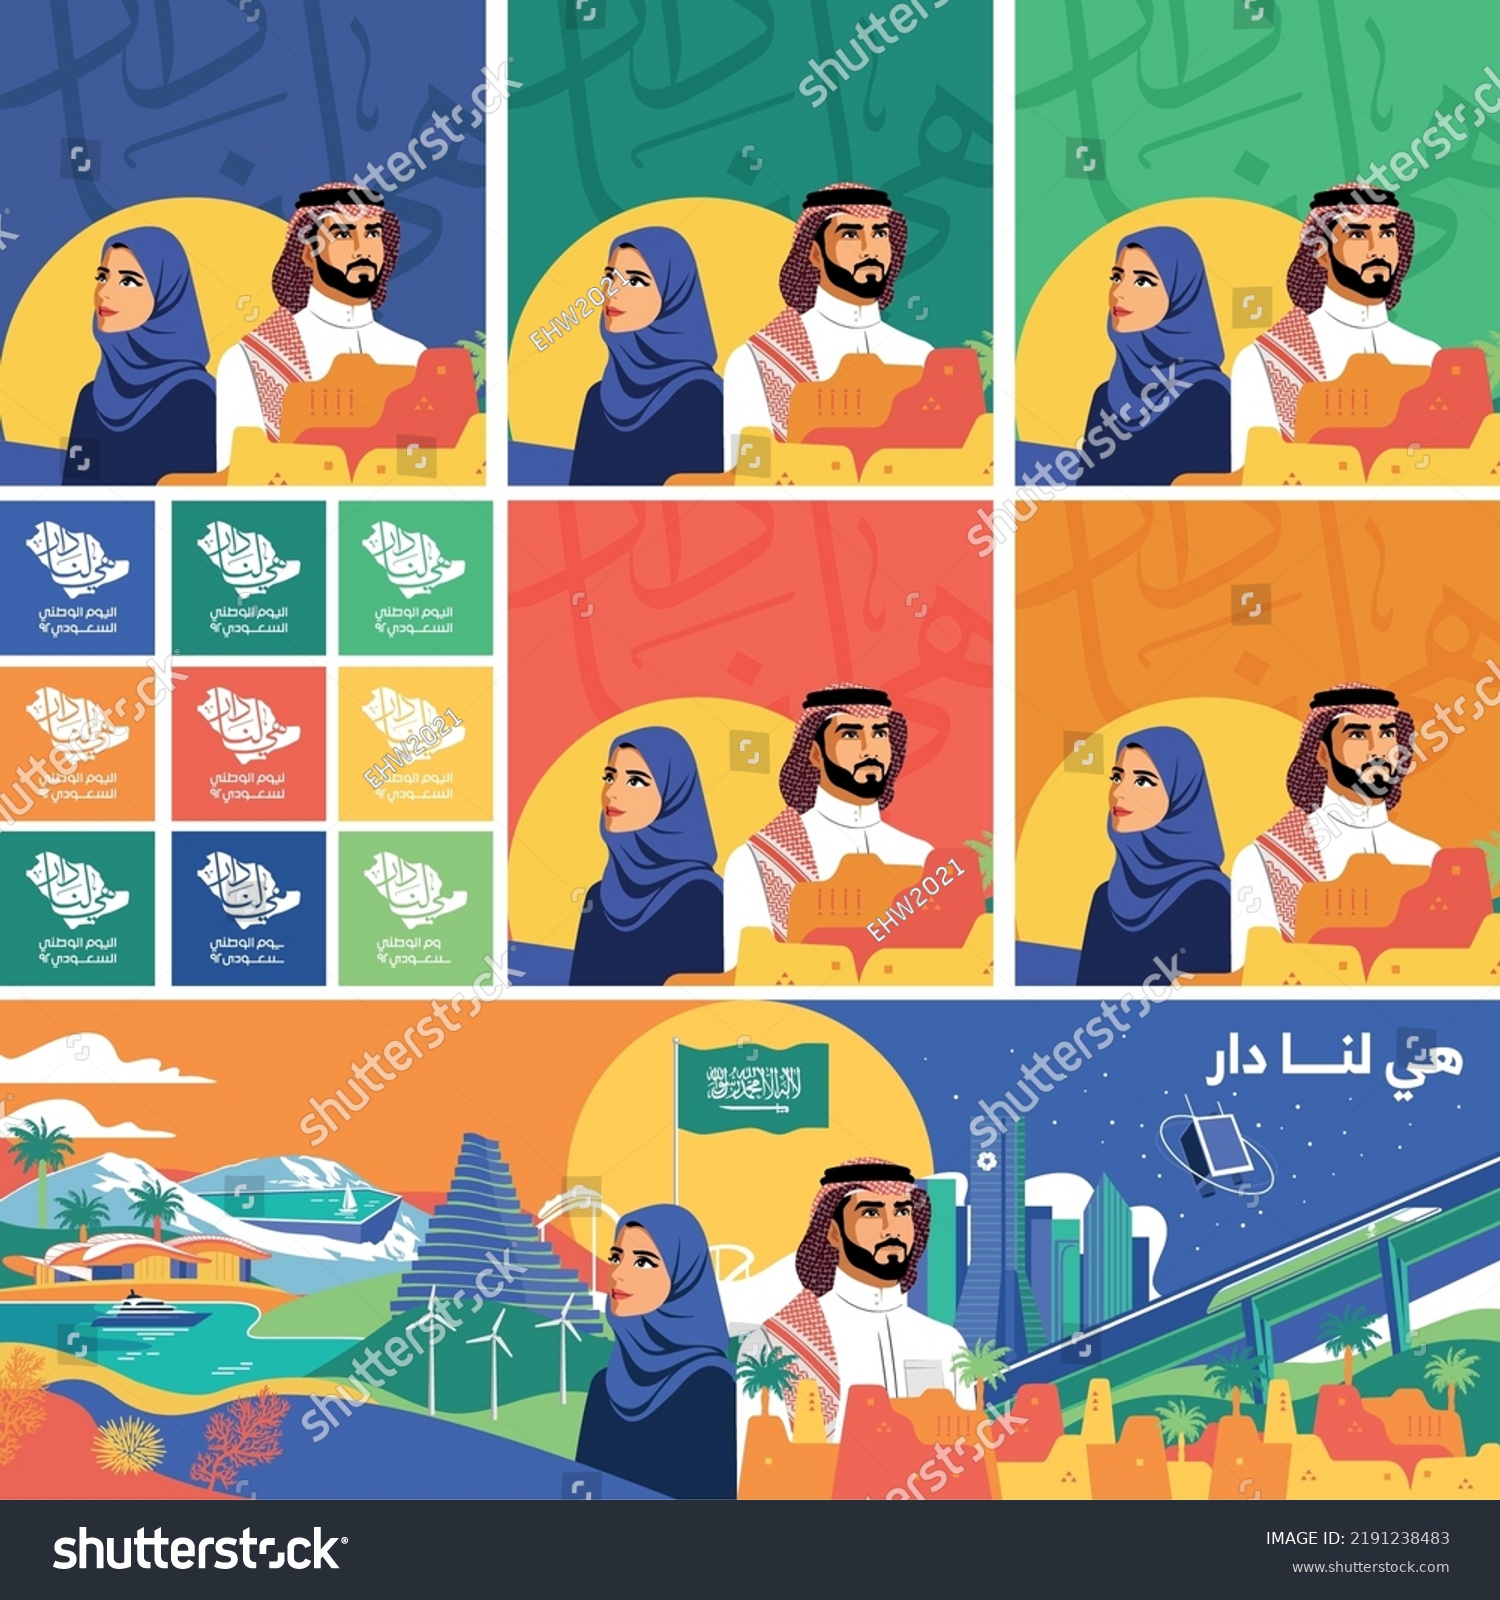 National Saudi day 92 illustration with Arabic text (It's our home) and (Saudi national day 92) beautiful modern flat illustration, colorful and simple with the logo  #2191238483